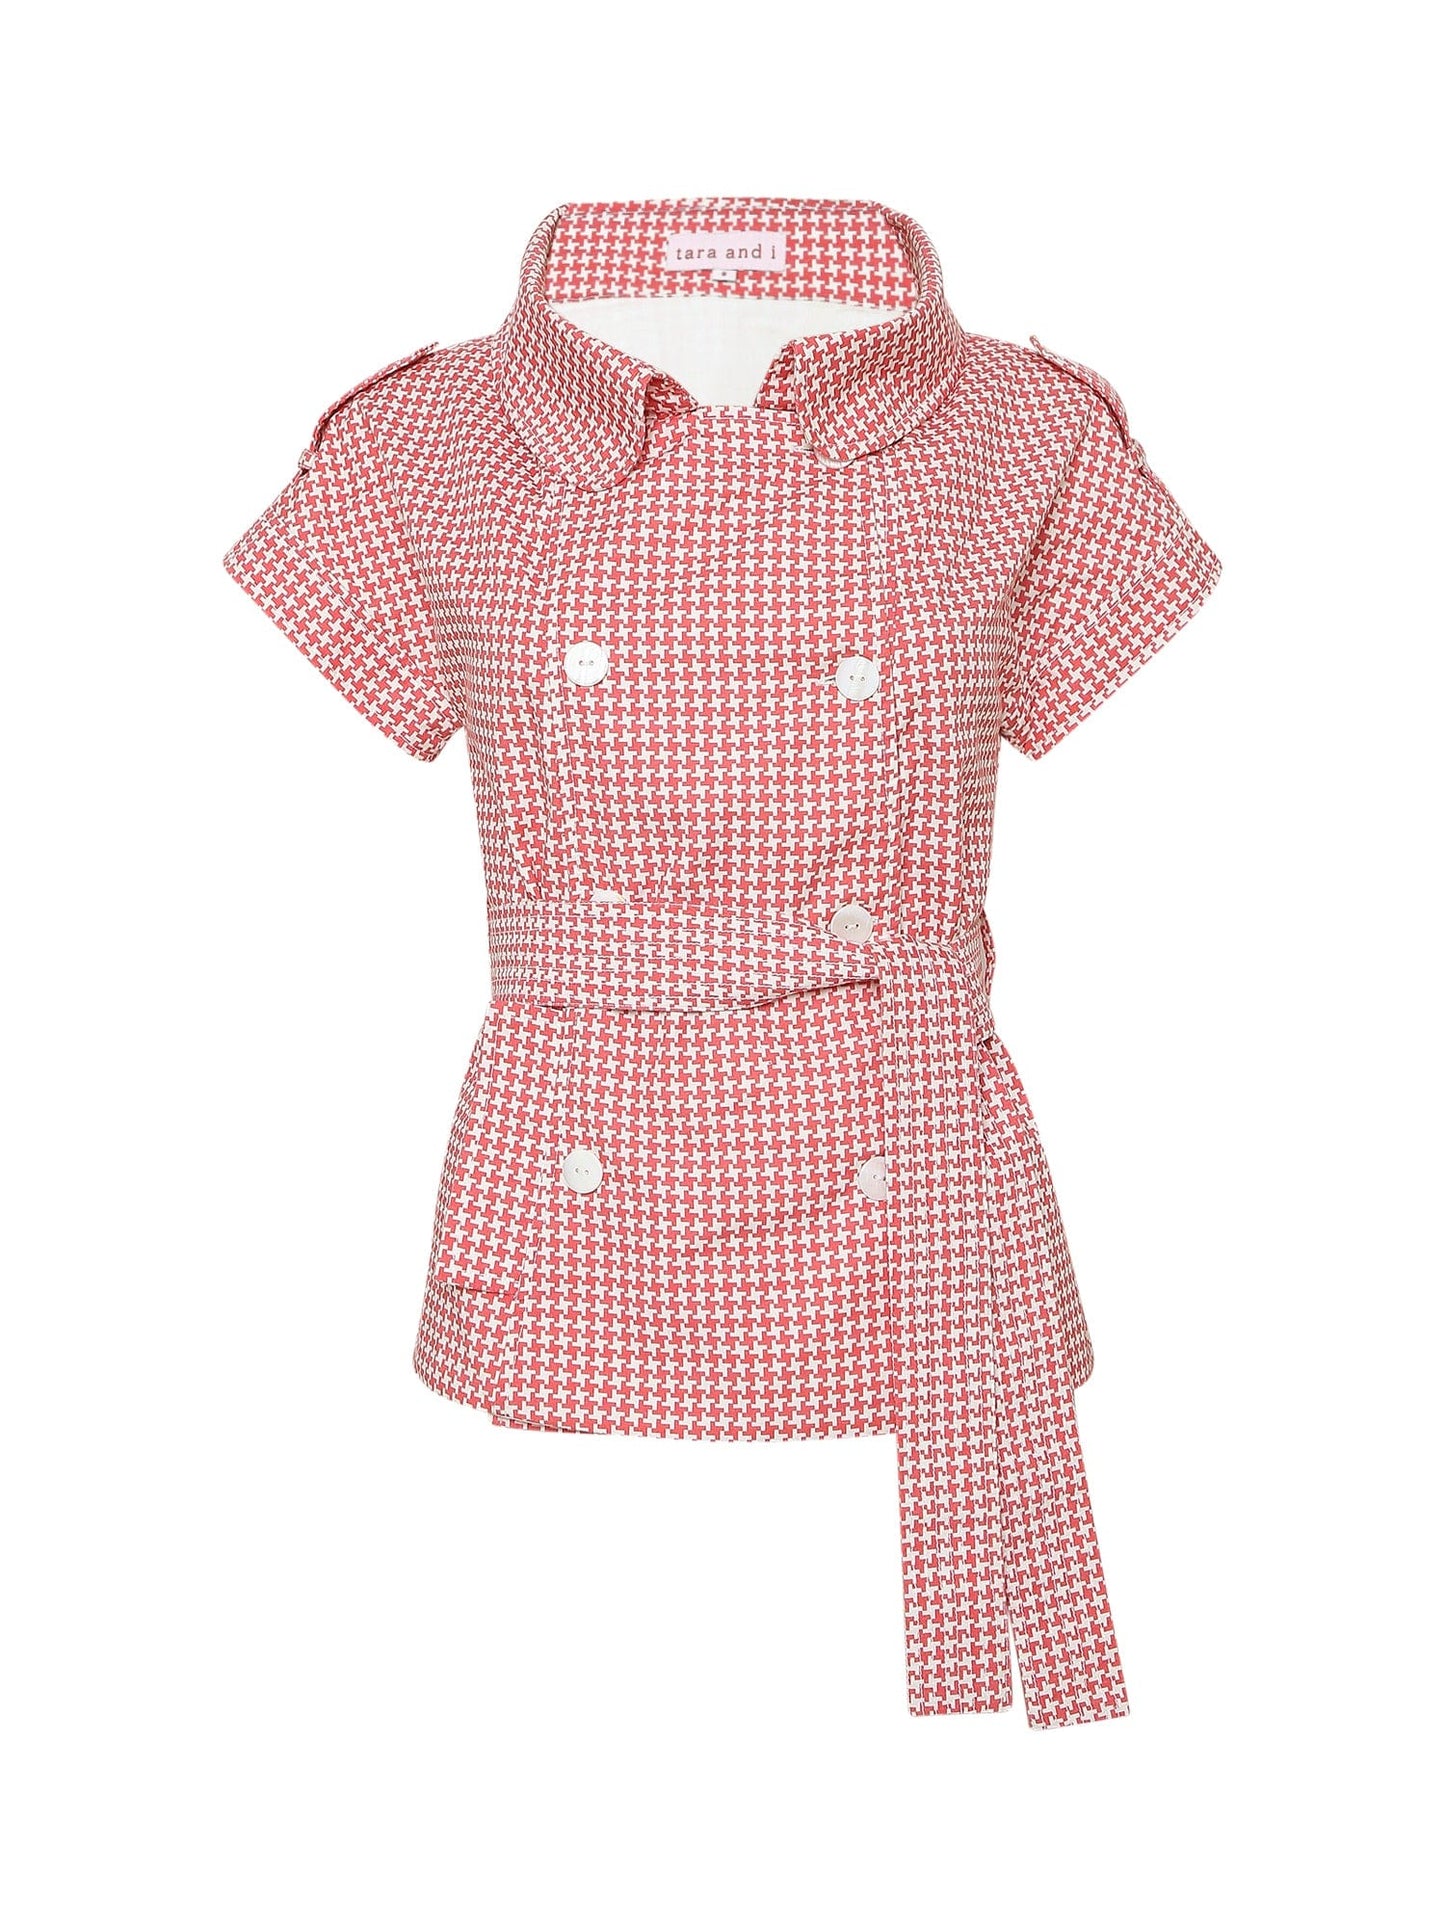 sweet rose houndstooth printed co-ord set